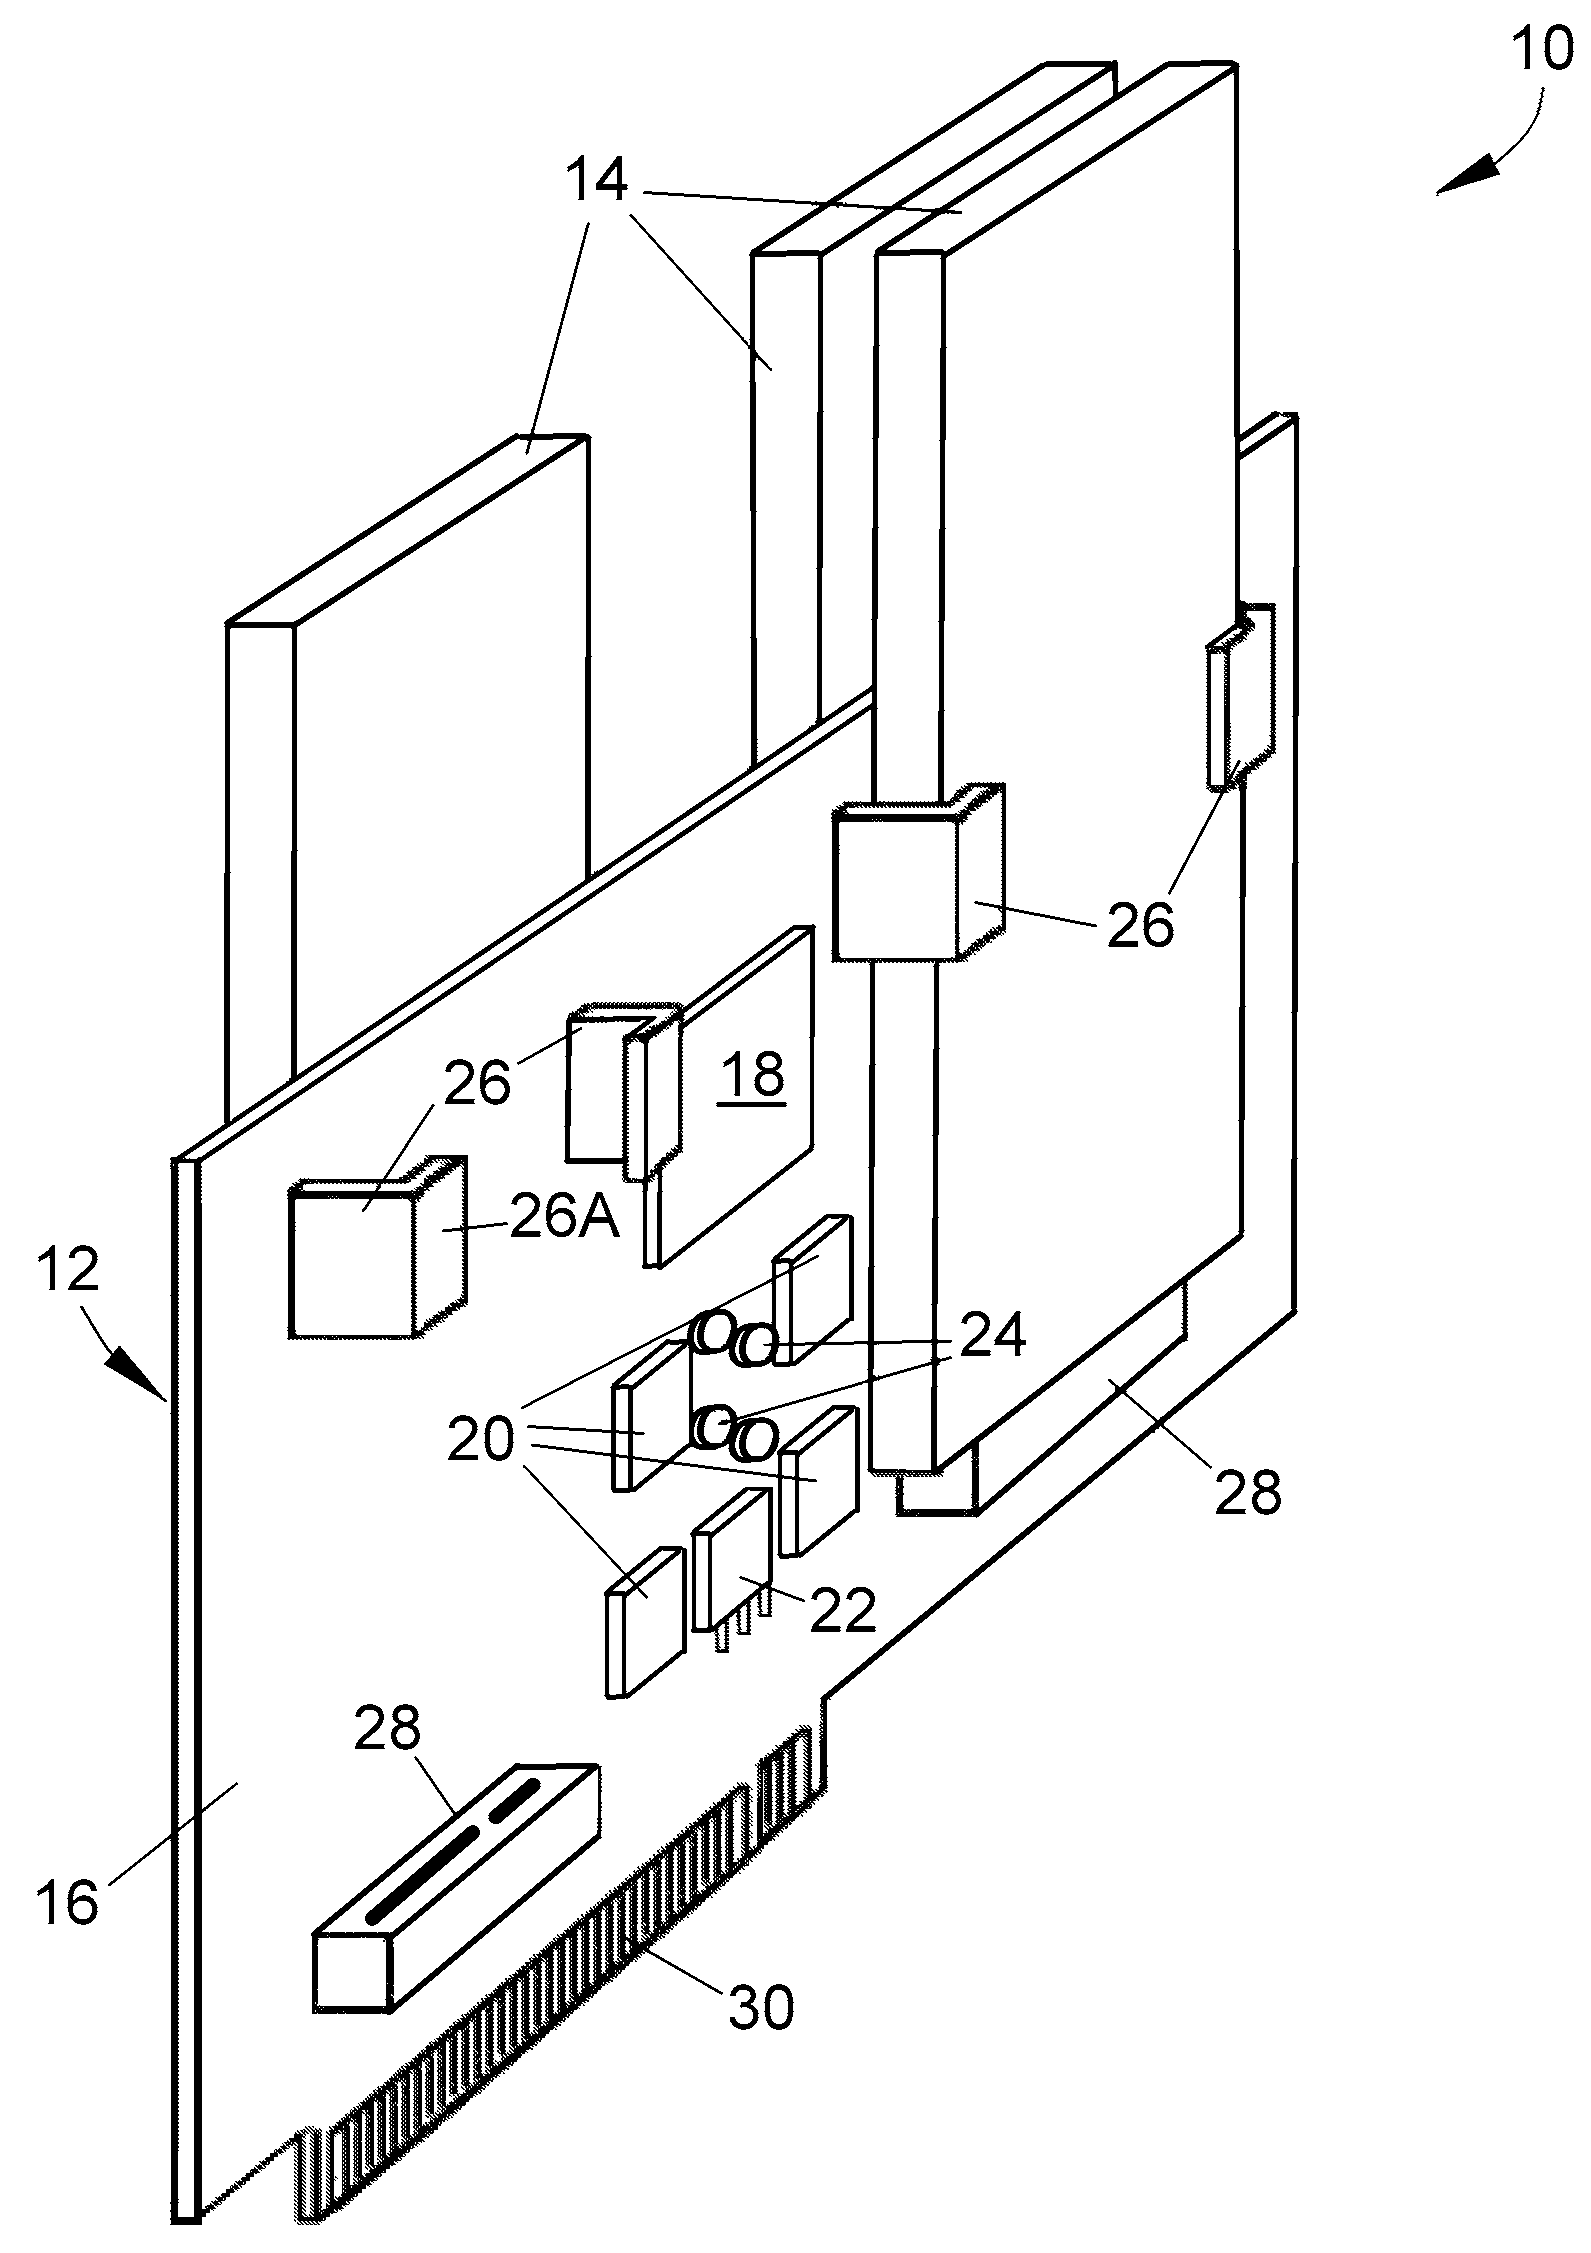 Modular mass storage system and method therefor